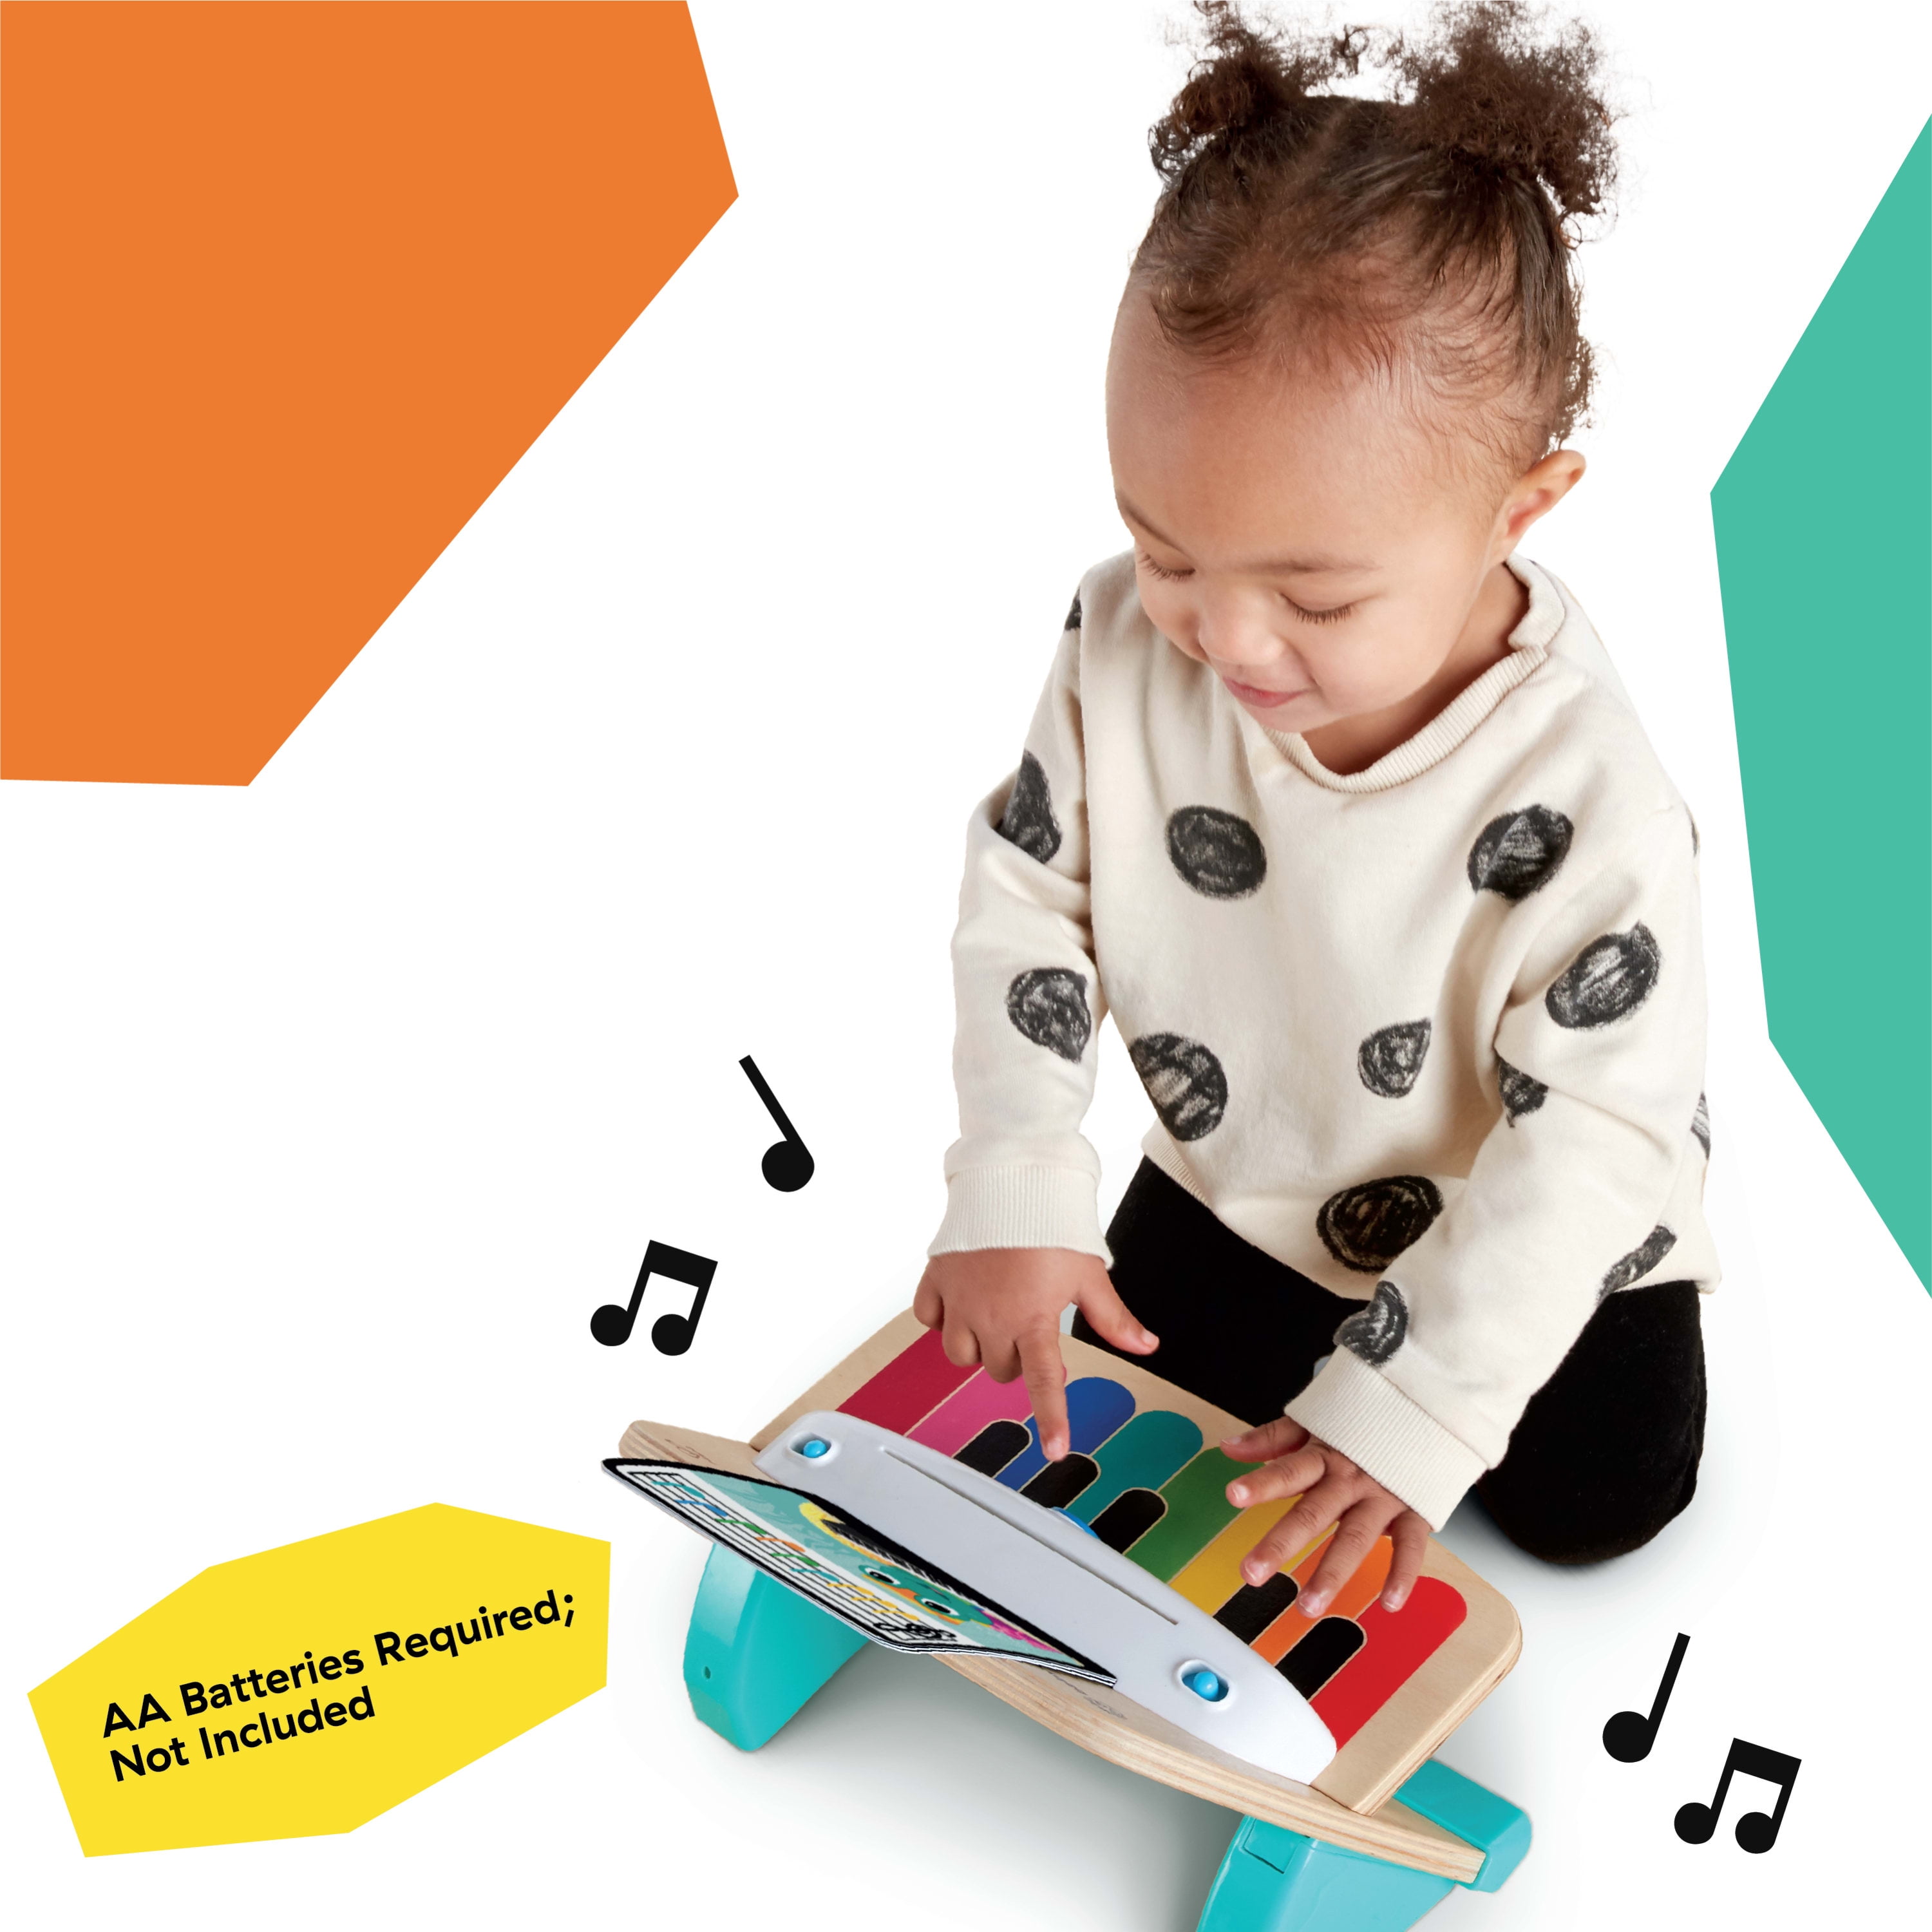  Baby Einstein and Hape Magic Touch Piano Wooden